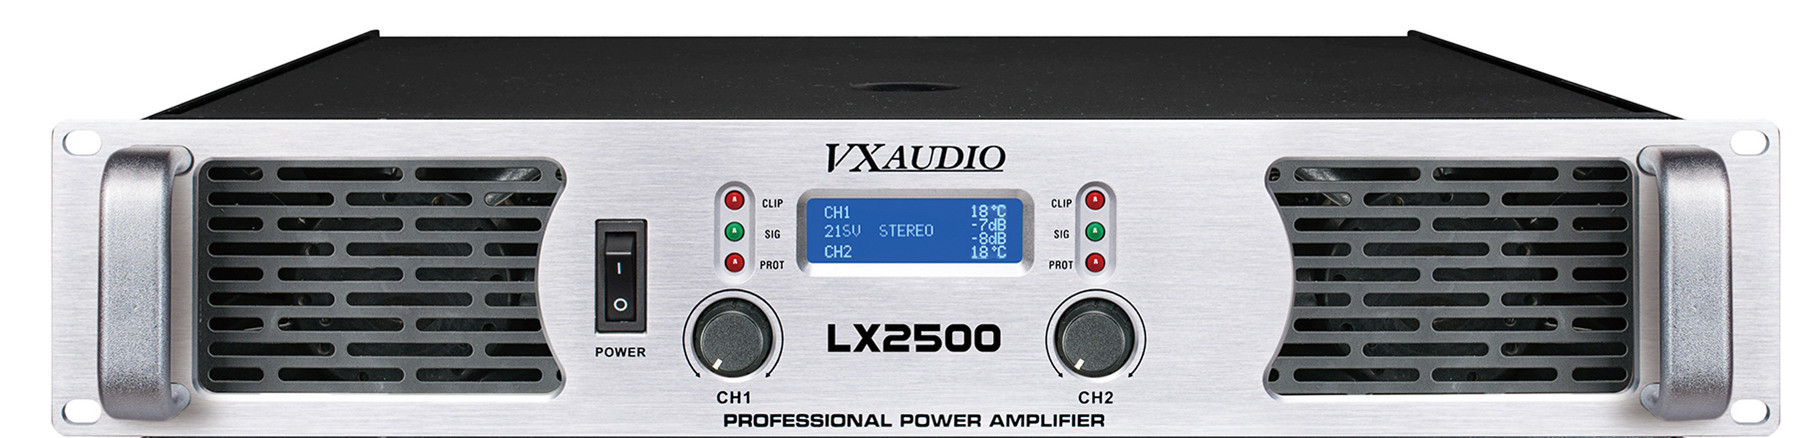 LCD Display High Power Professional Amplifier (LX 2500)